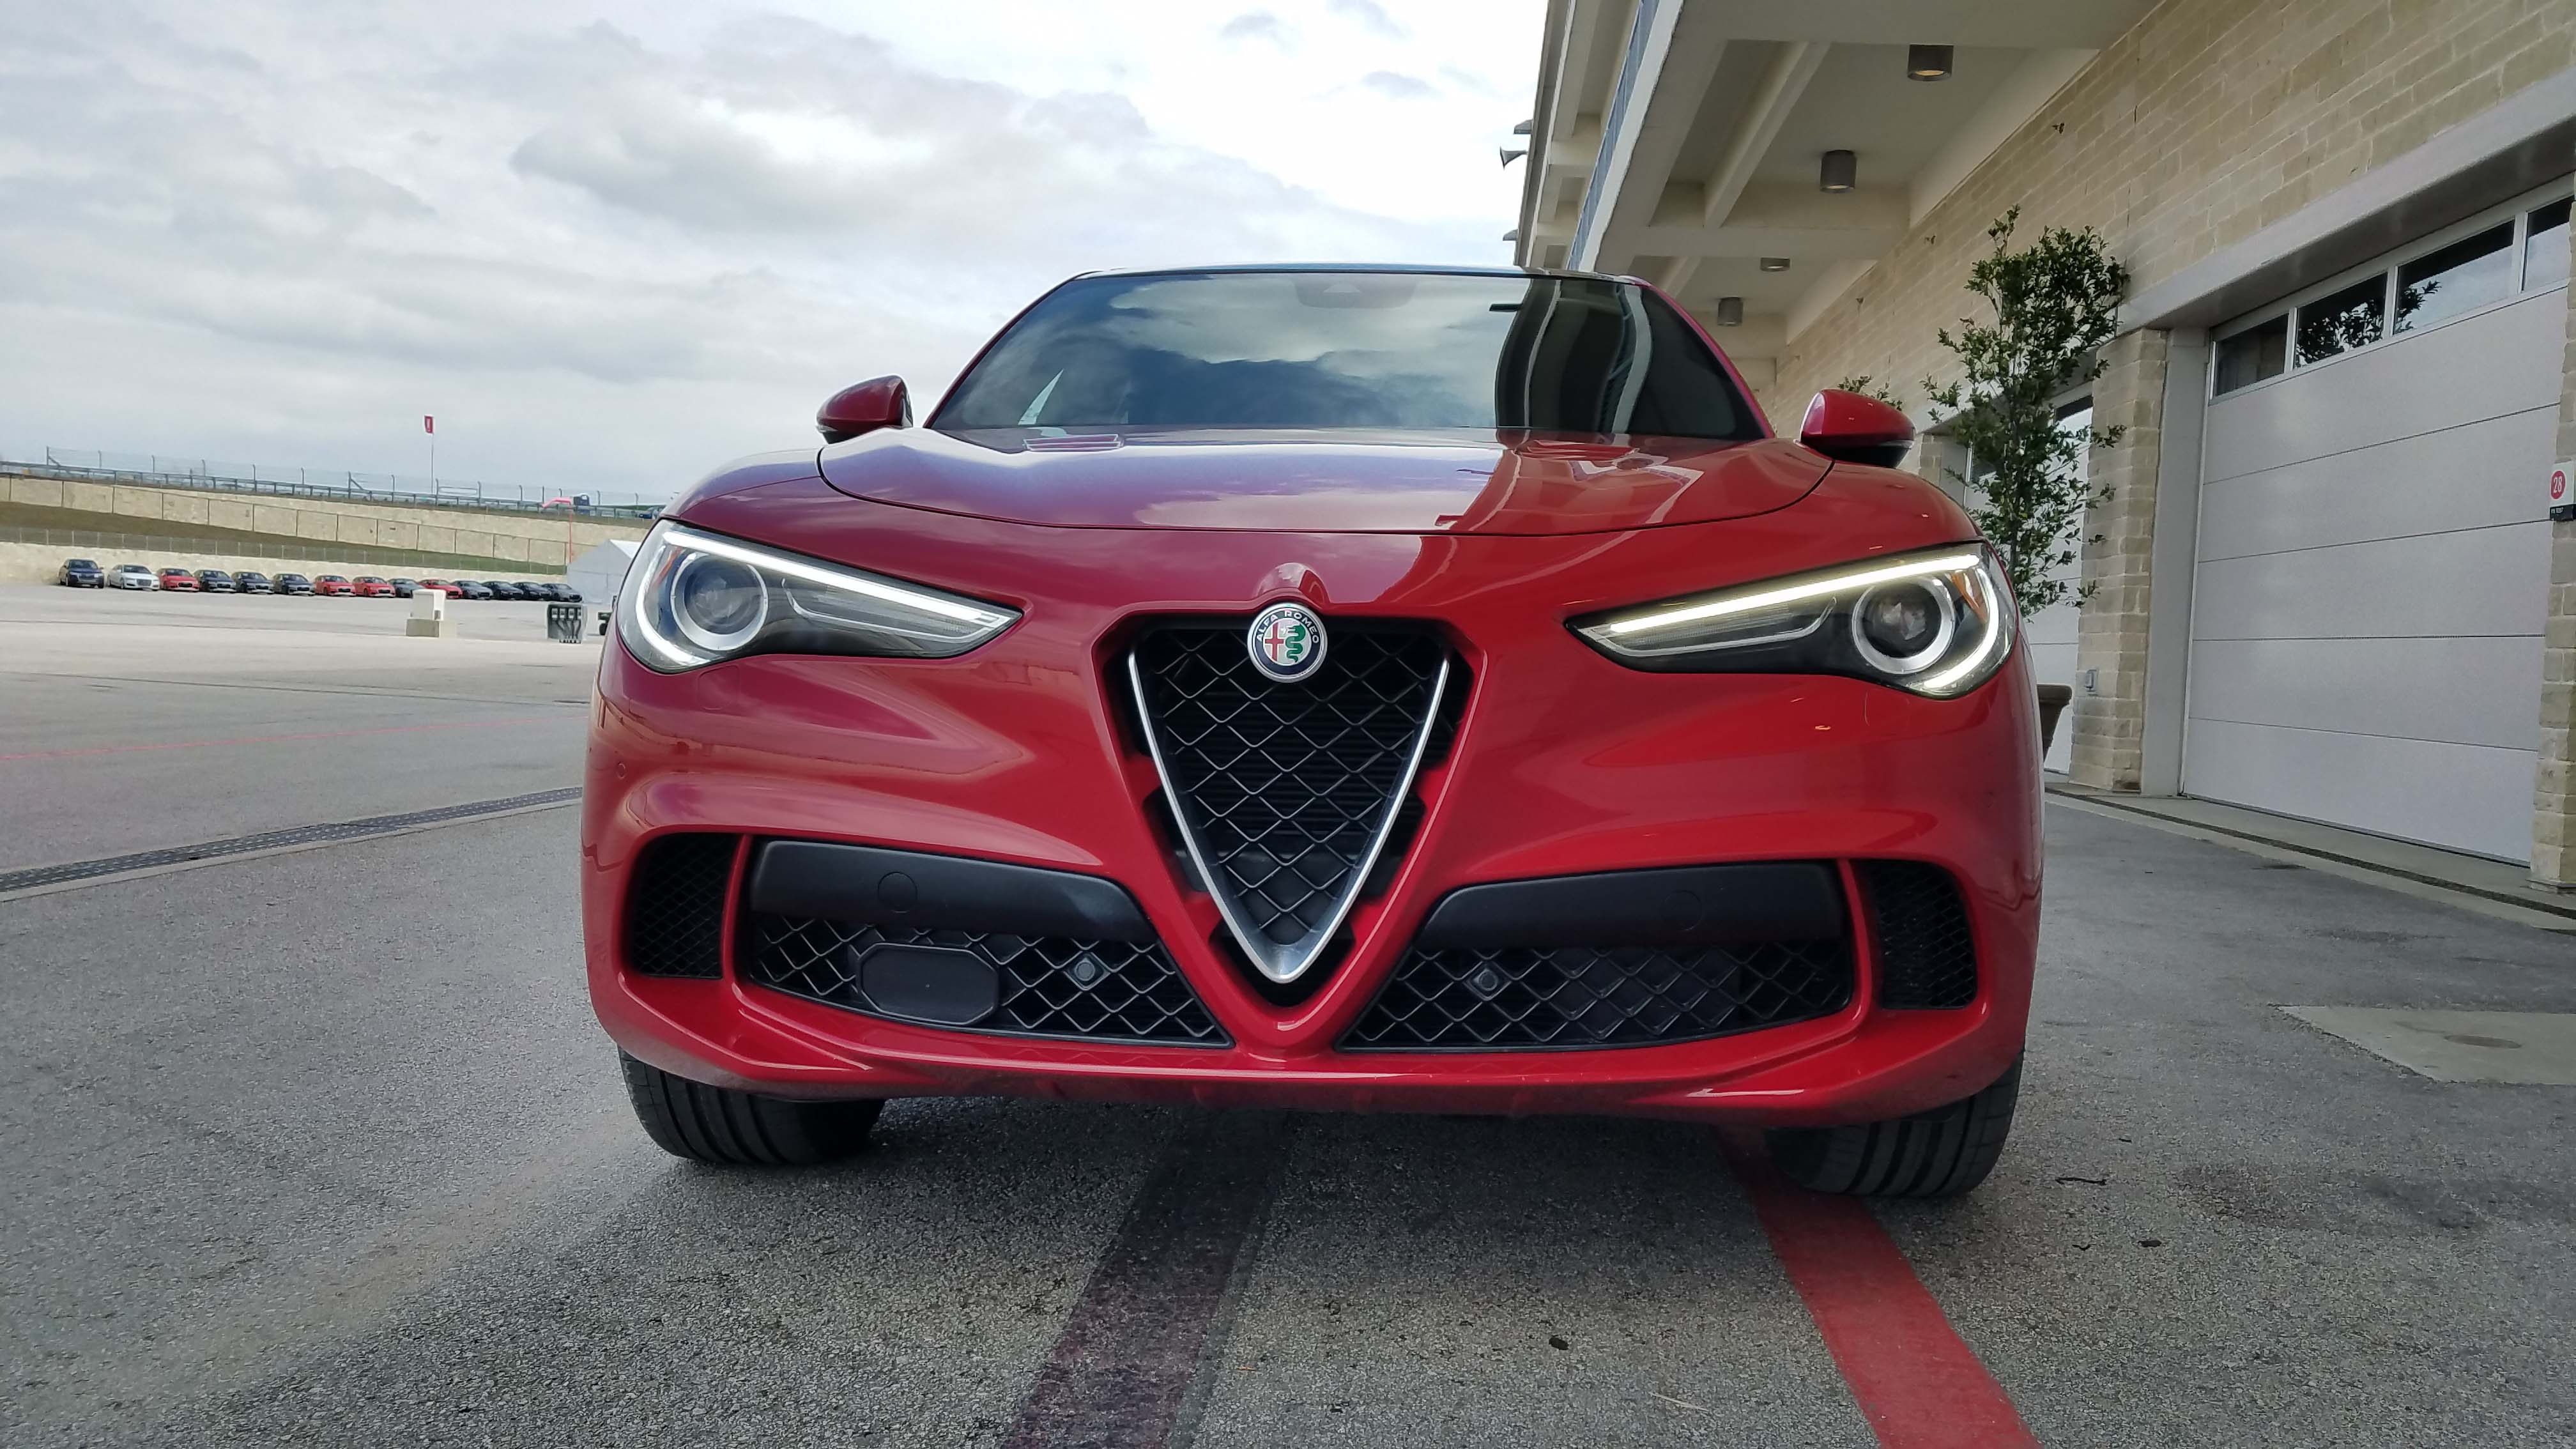 The Stelvio Quadrifoglio features Alfa's signature Trilobo grille, with larger lower air scoops than the standard Stelvio to feed its big engine.